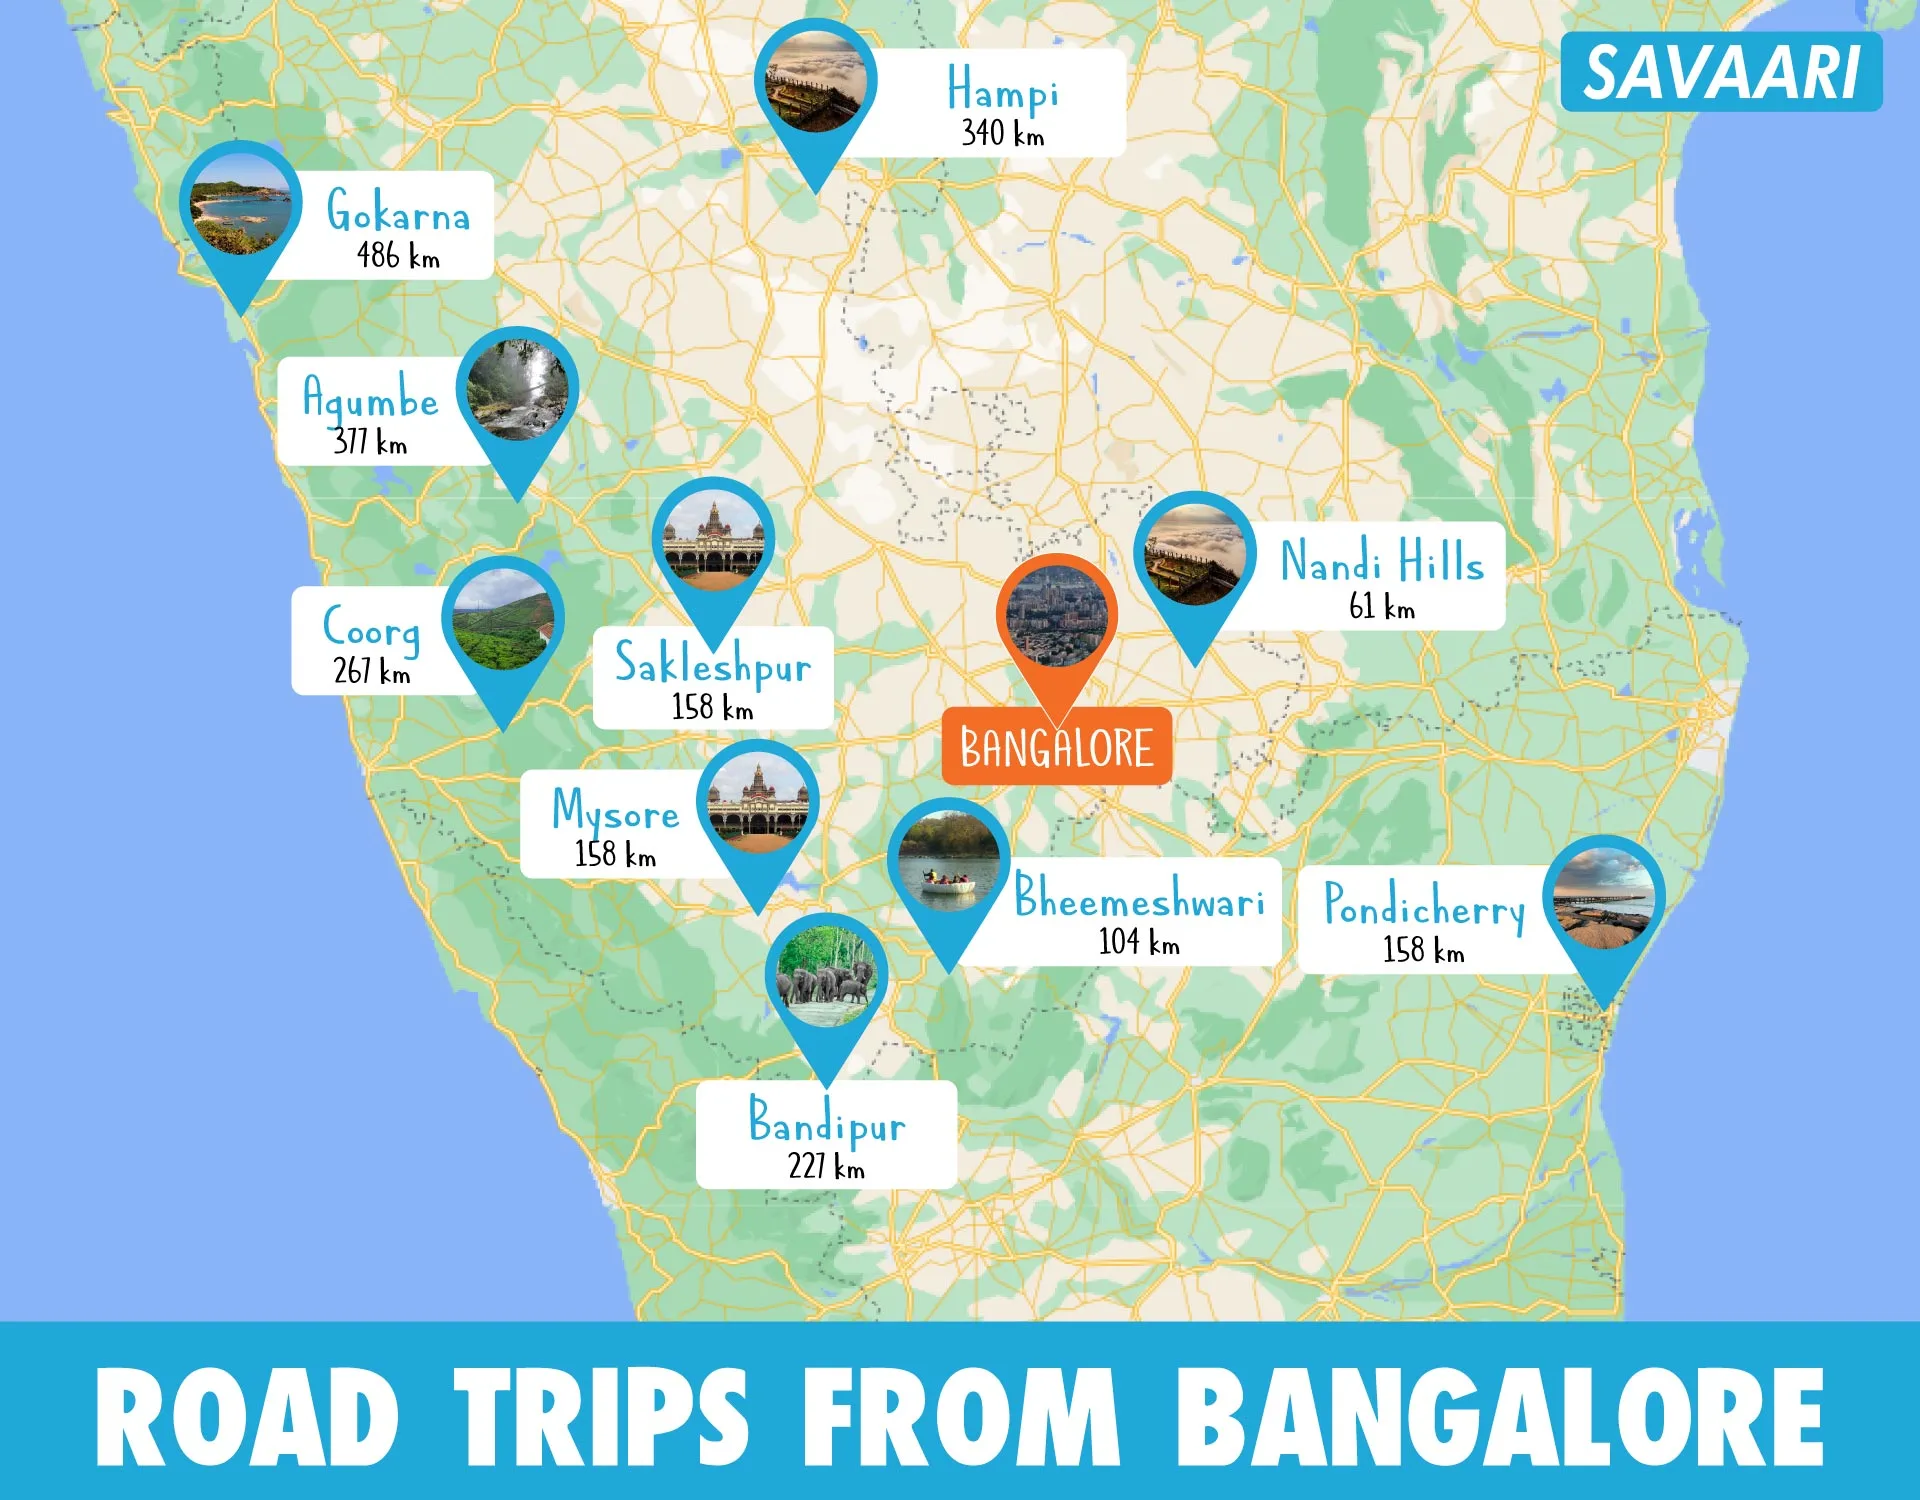 Places to visit near Bangalore - Bookmark these awesome road trips